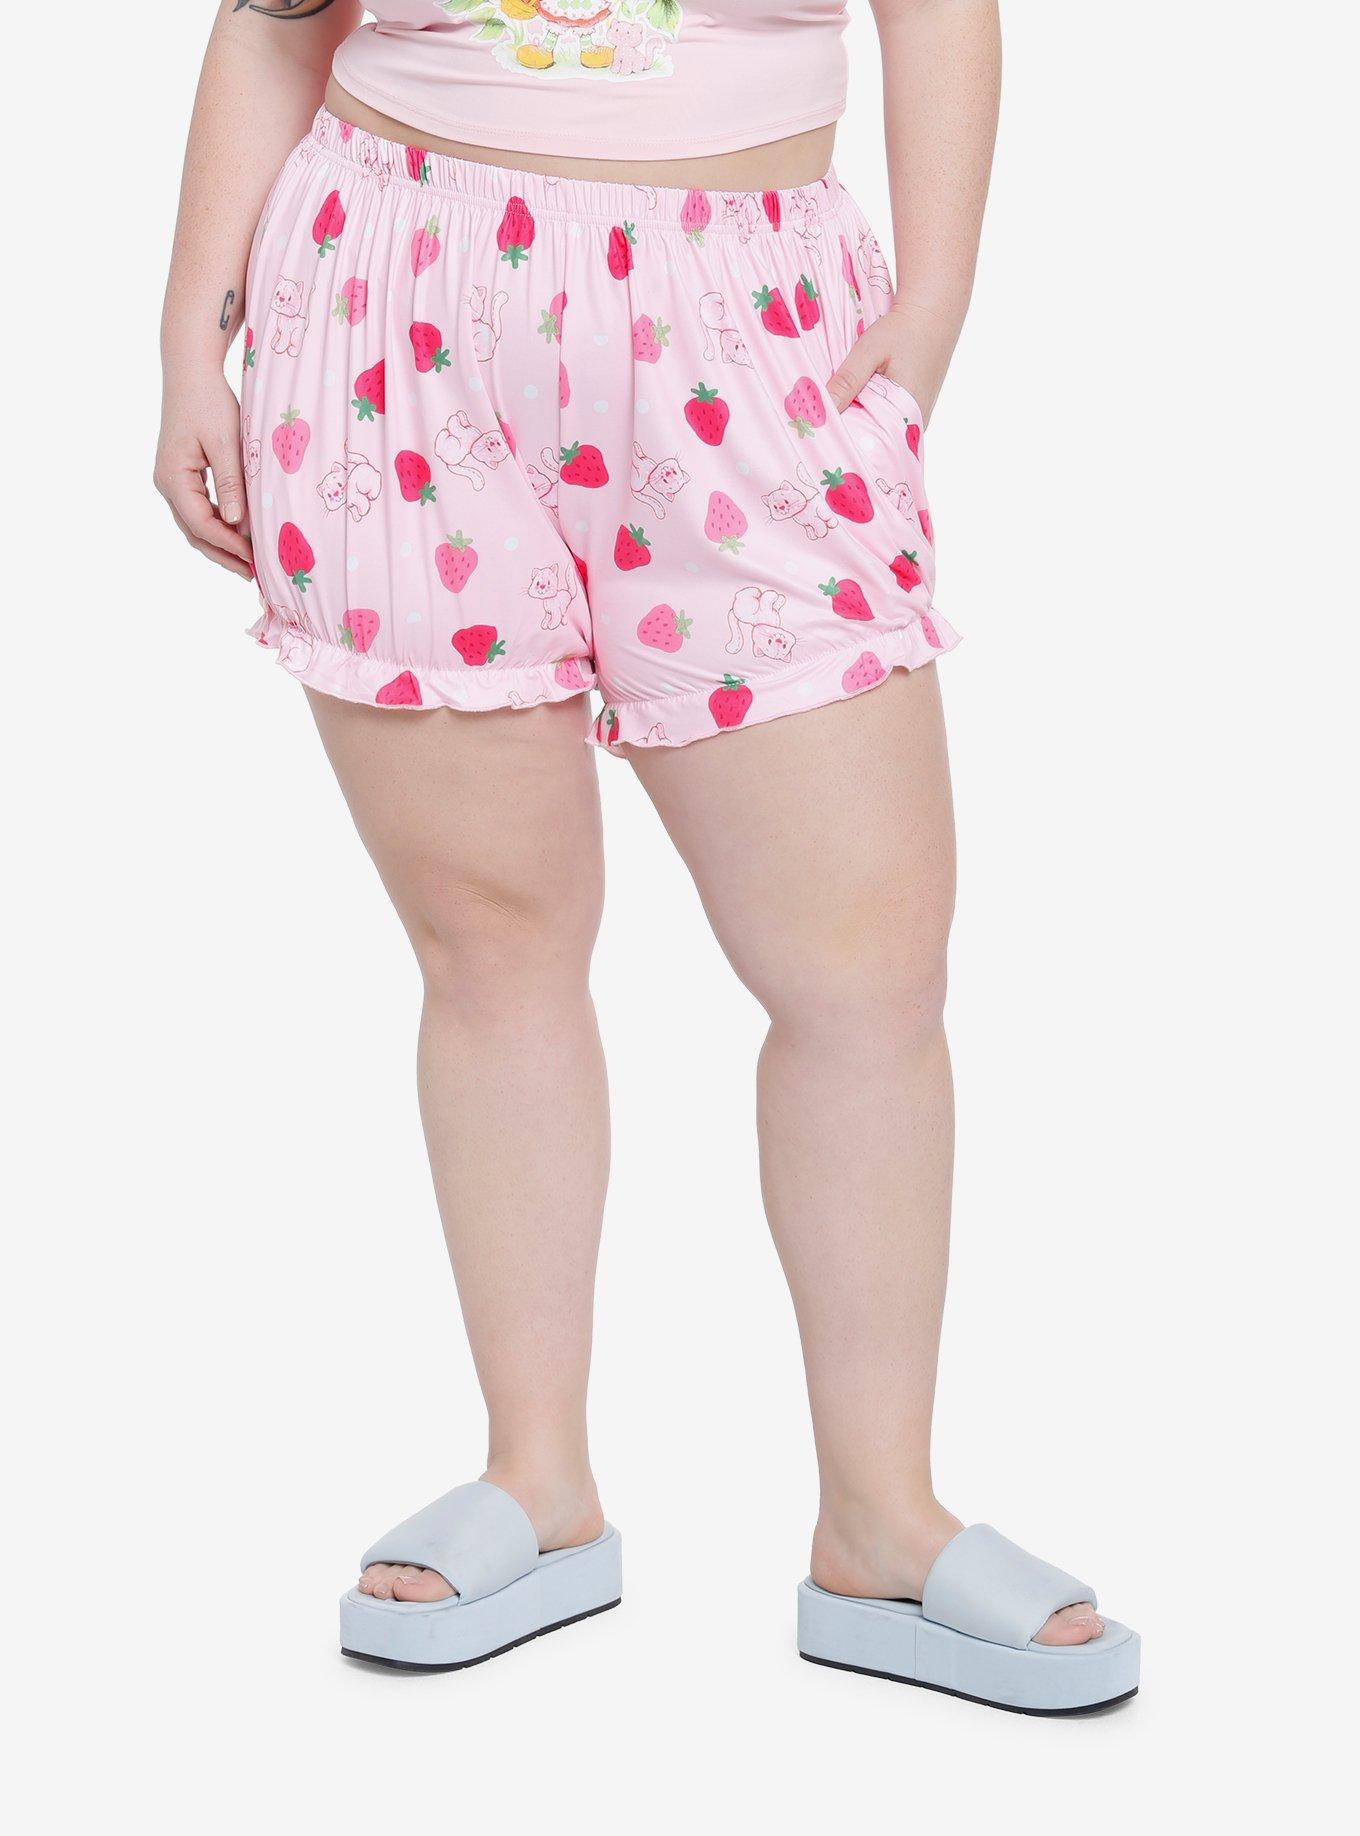 plus size costume bloomers